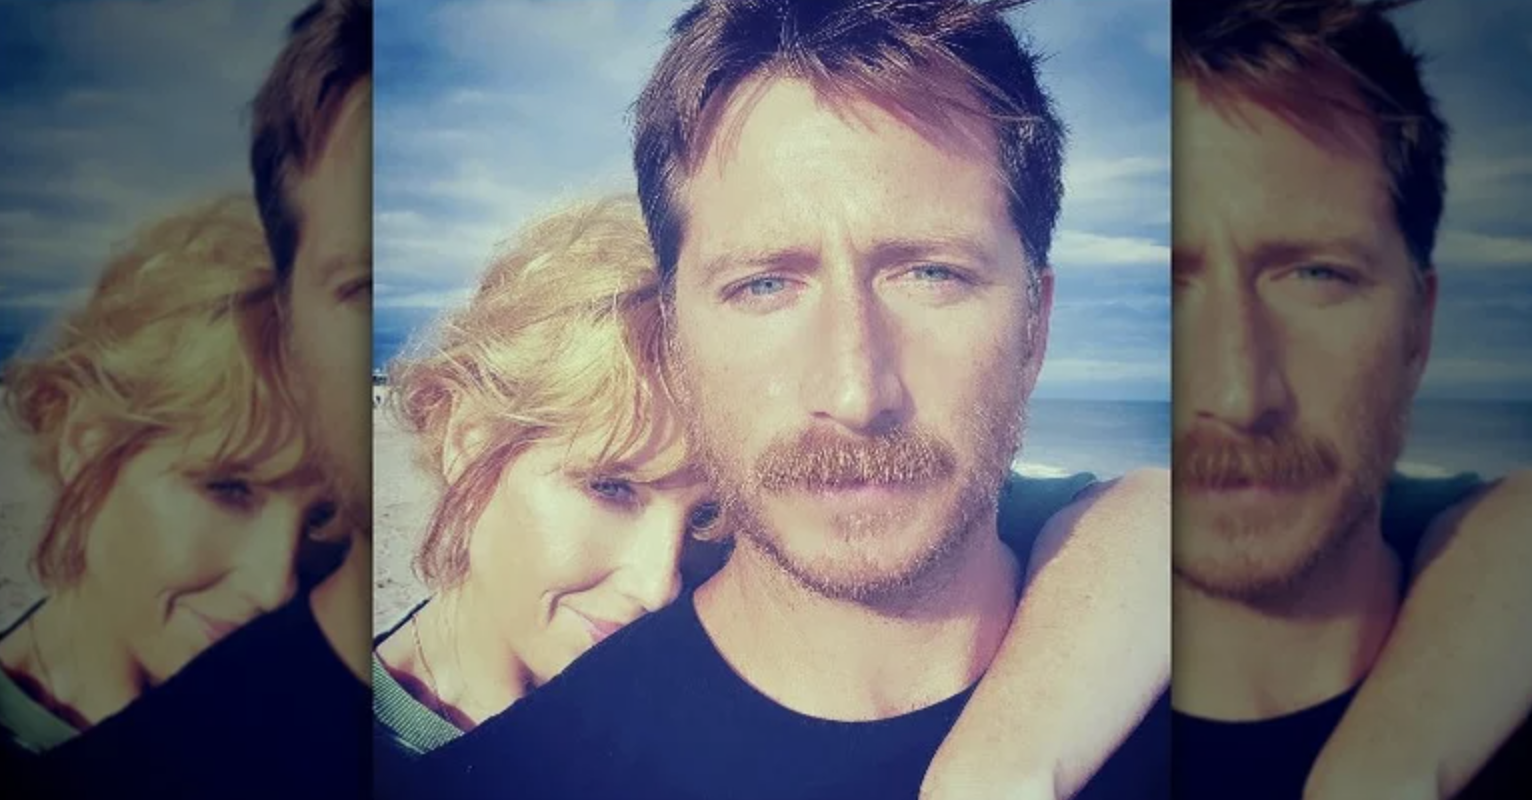 Kyle Baugher and Kelly Reilly